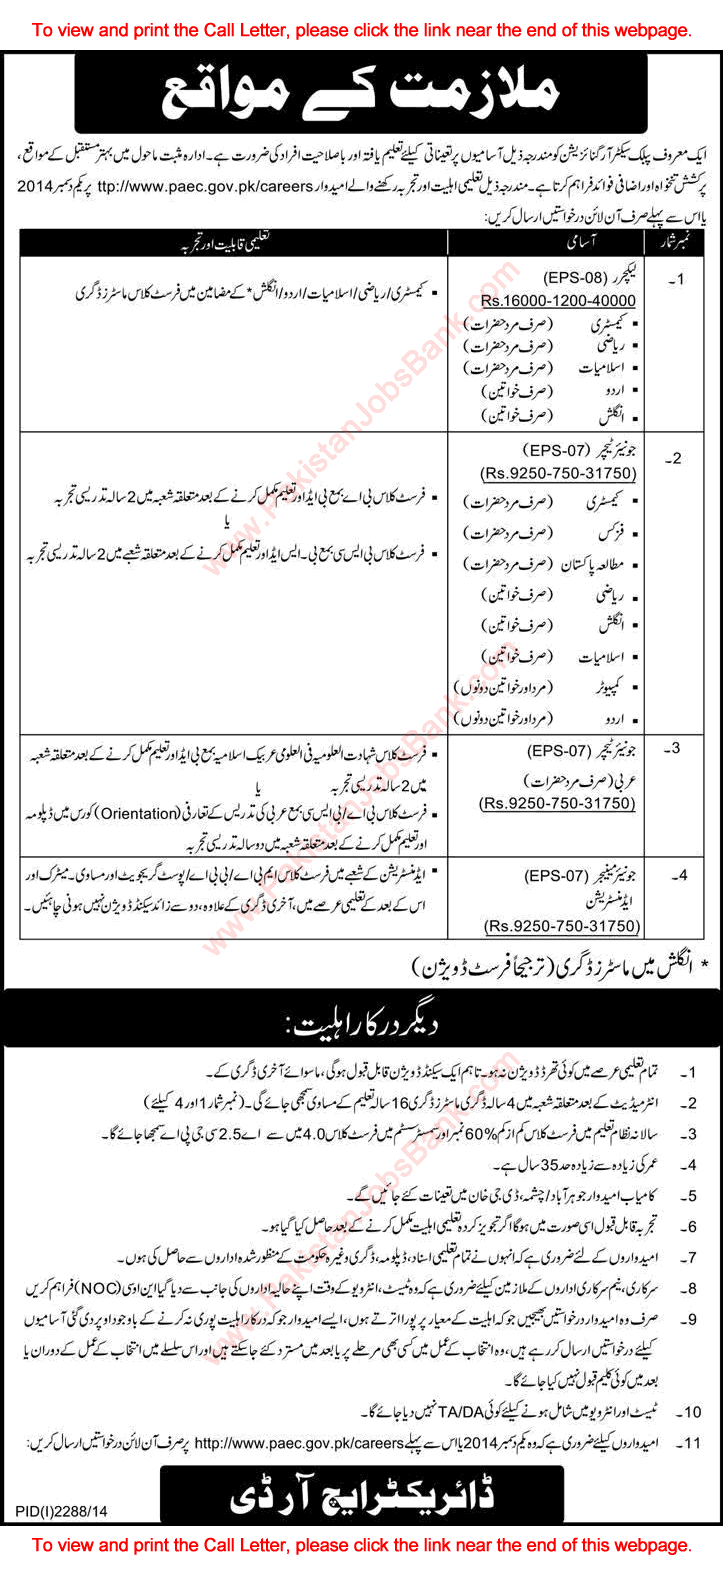 PAEC Jobs Written Test Call Letter April 2015 Online Print Roll No Slip for Lecturers, Junior Teachers & Managers